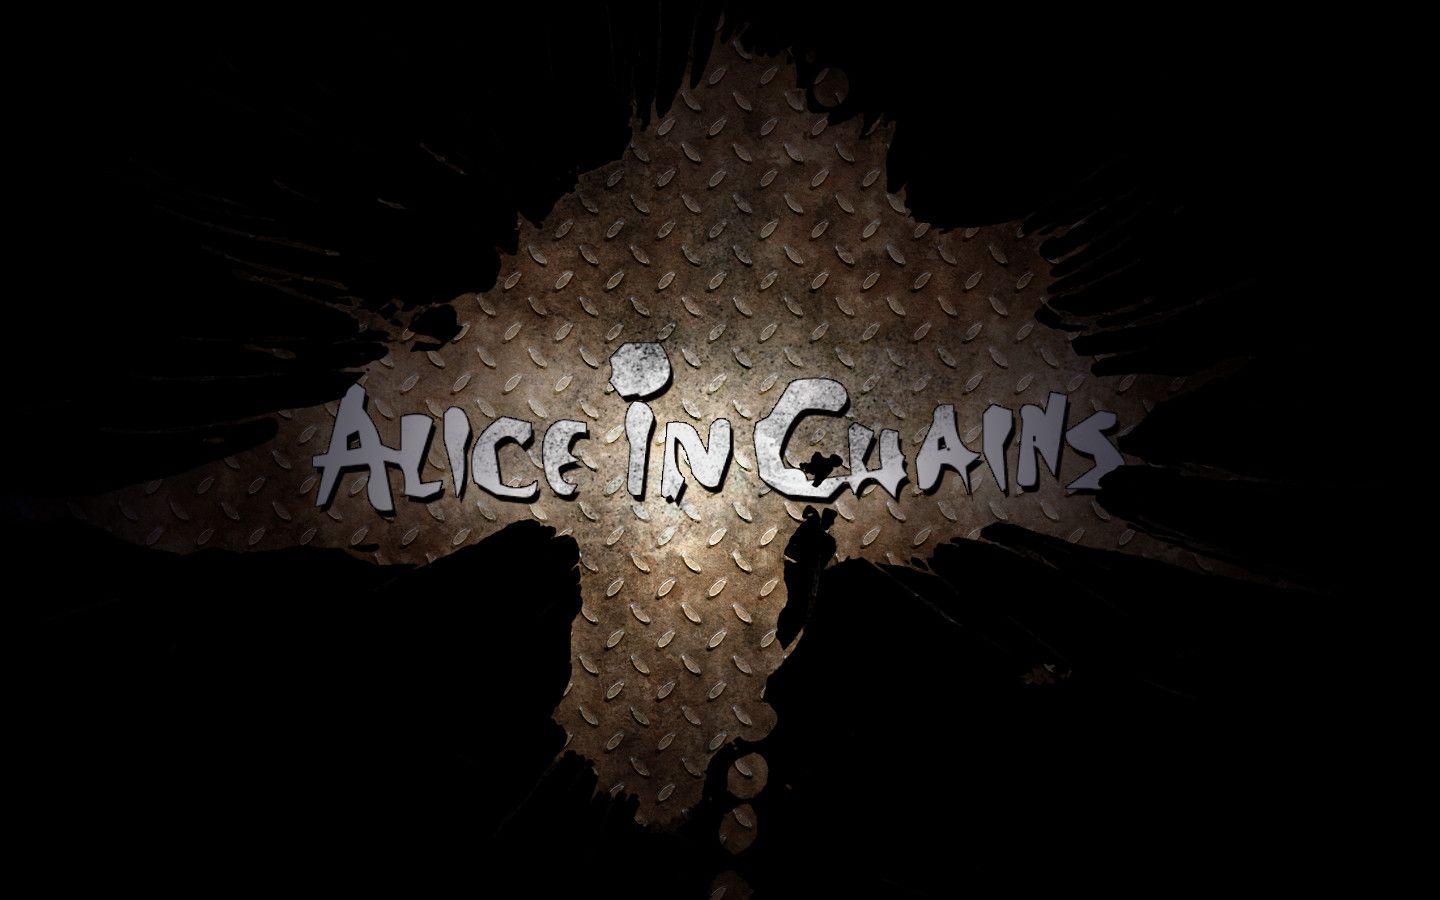 Alice In Chains Background 10 1080p. Wallpaperiz